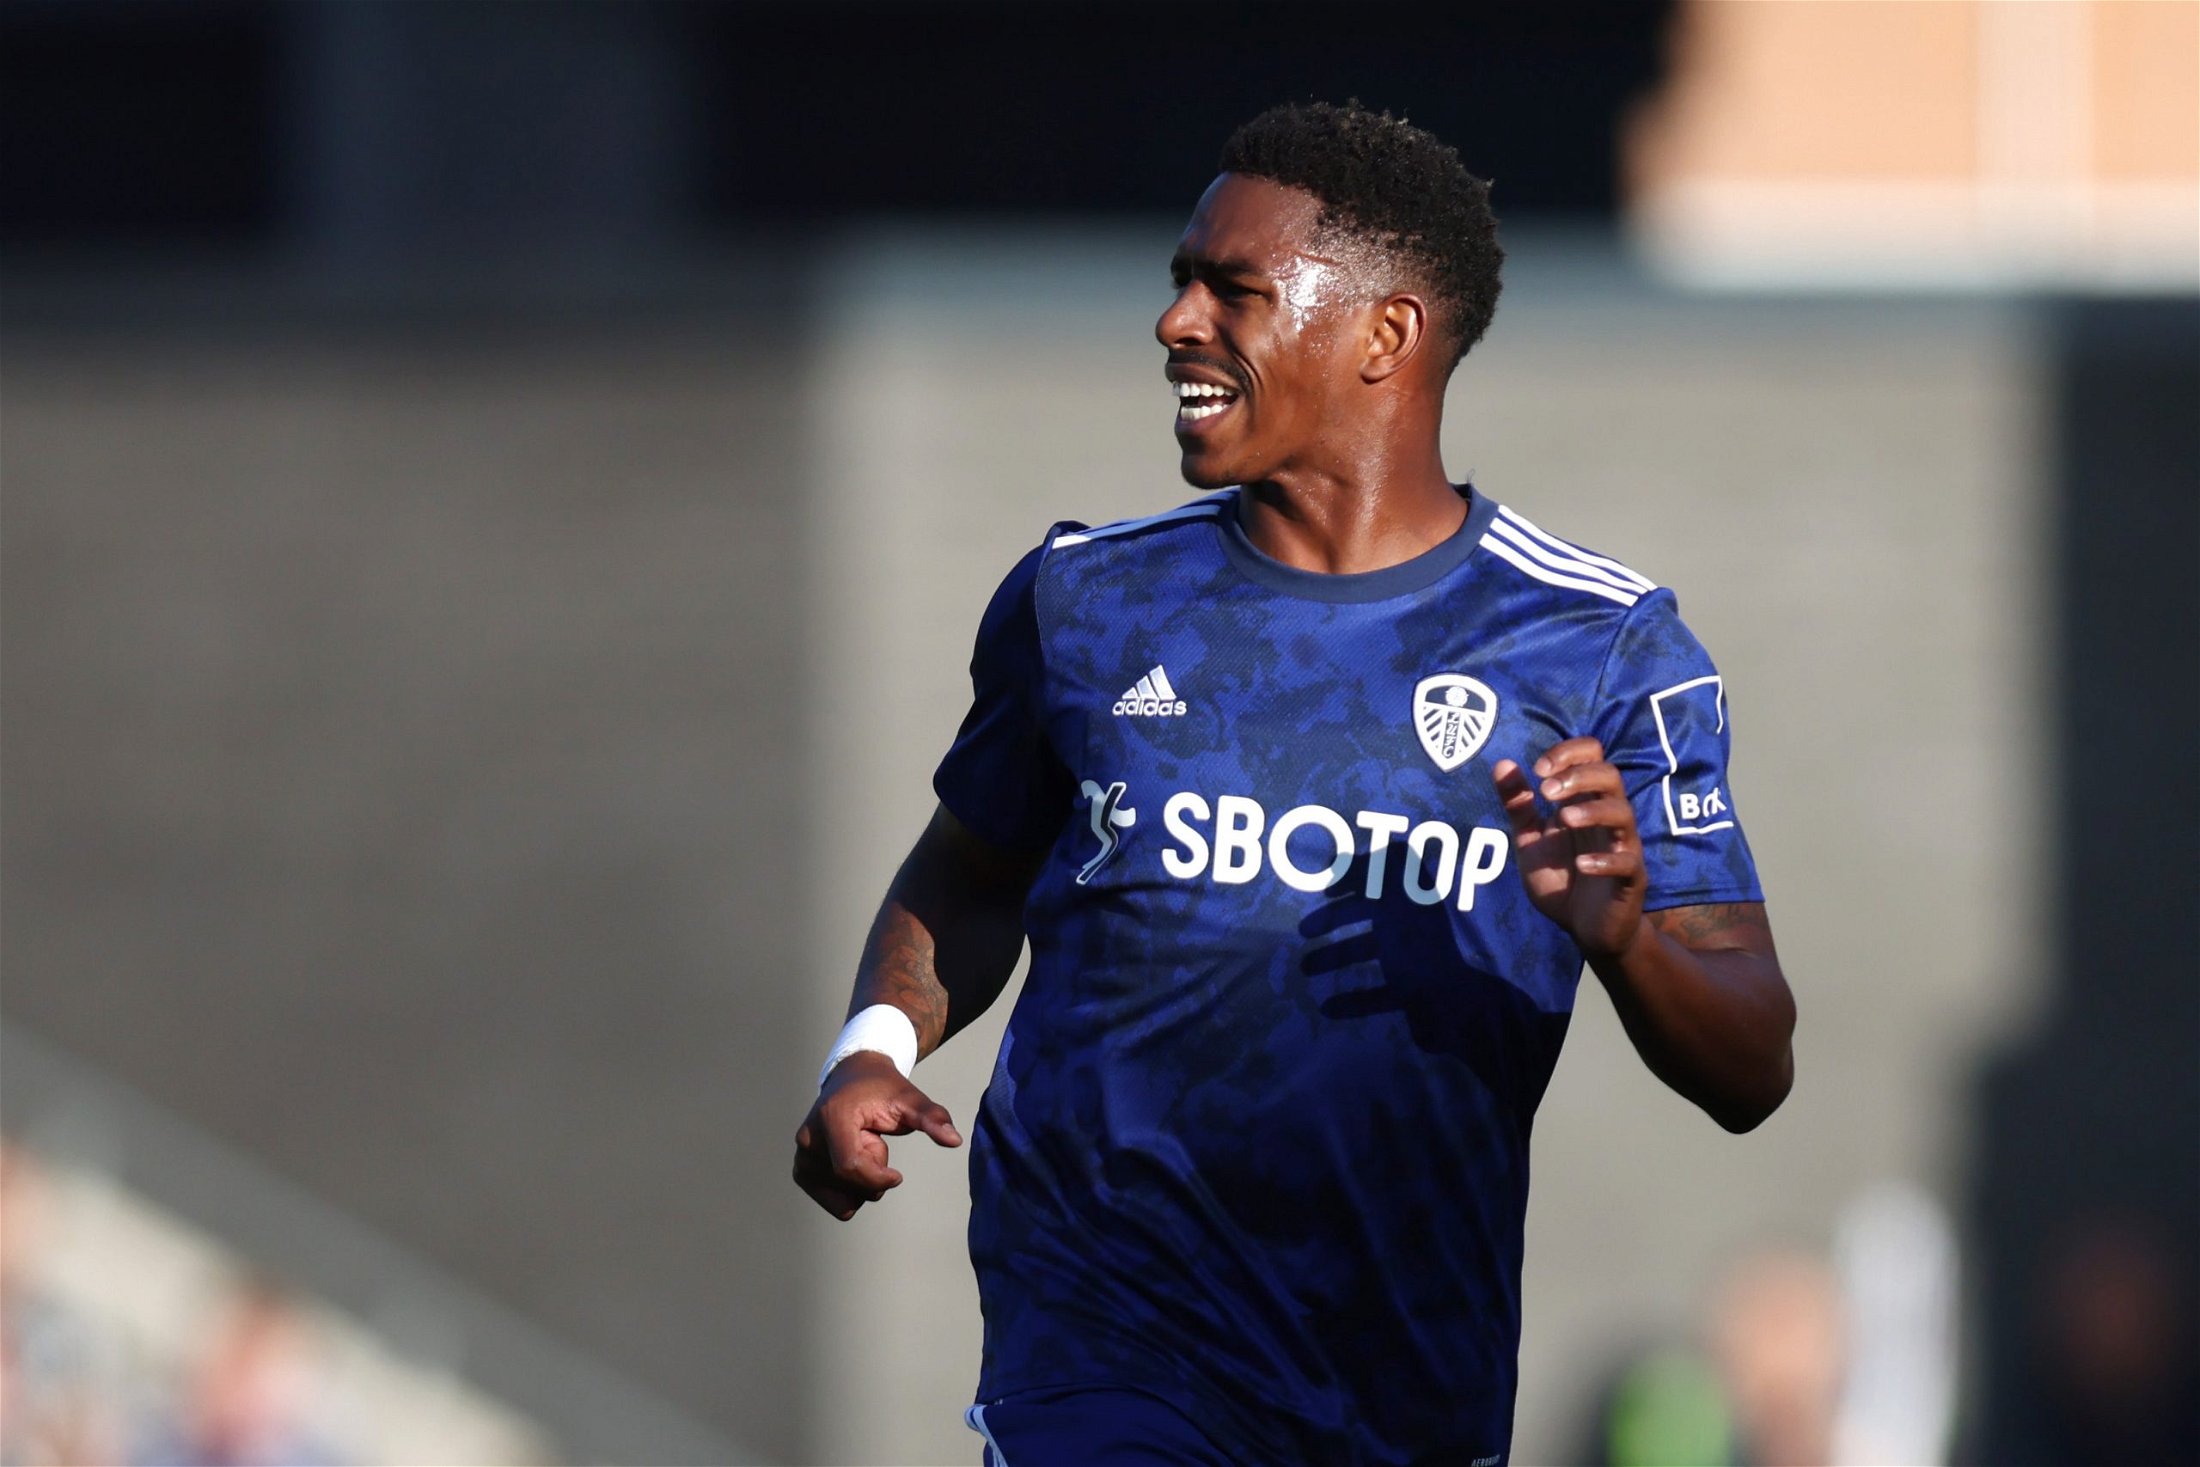 Quiz: Are these 15 statements about Leeds United’s Junior Firpo true or false?